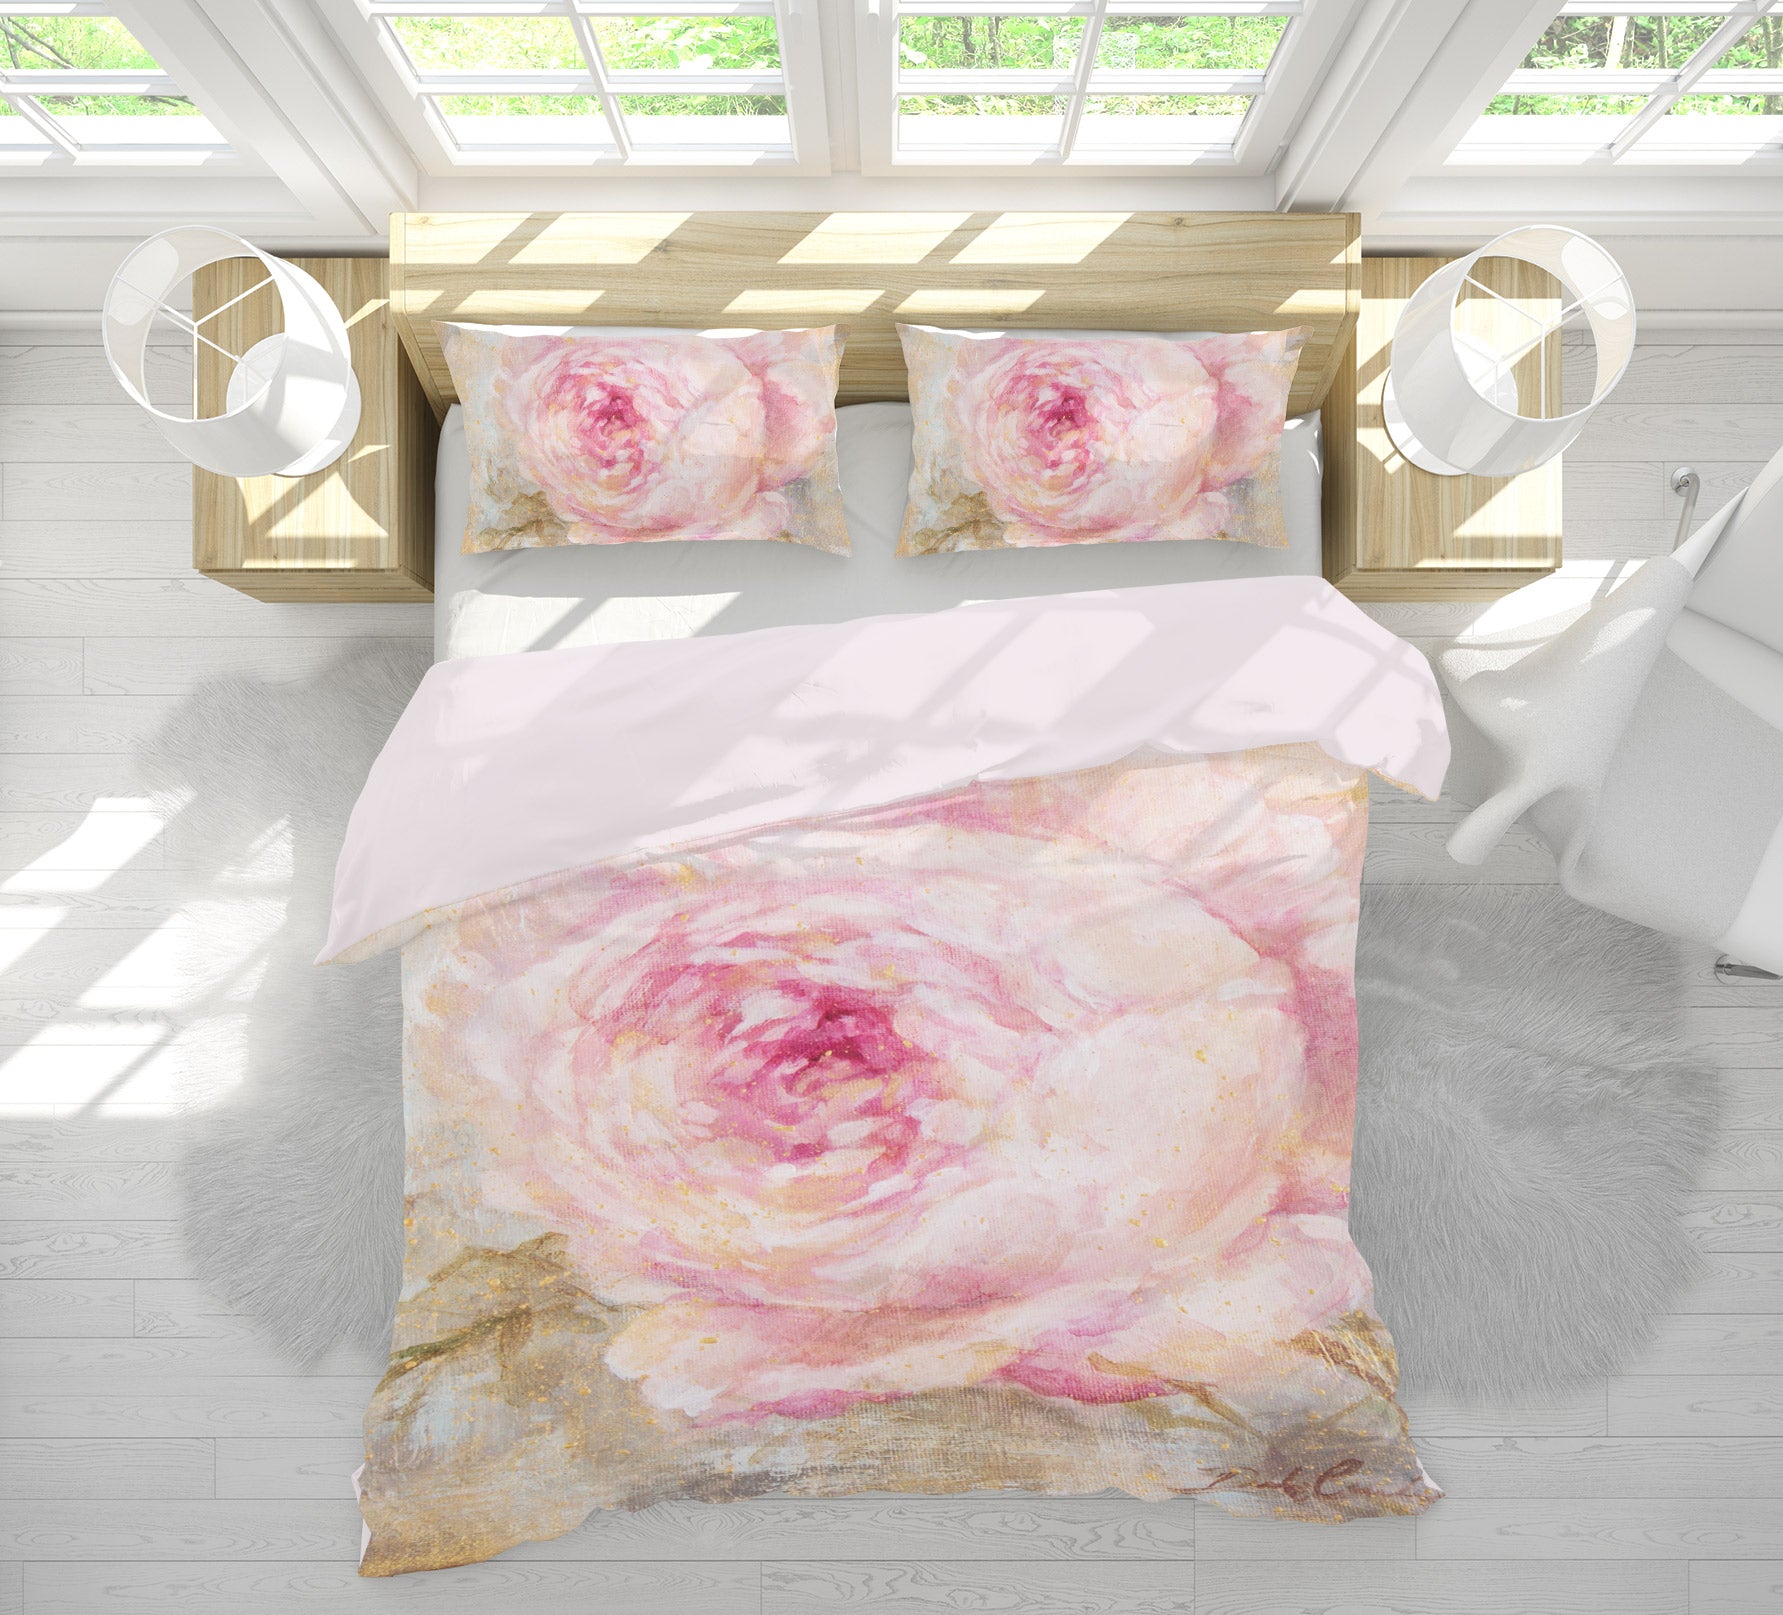 3D Pink Flower 2132 Debi Coules Bedding Bed Pillowcases Quilt